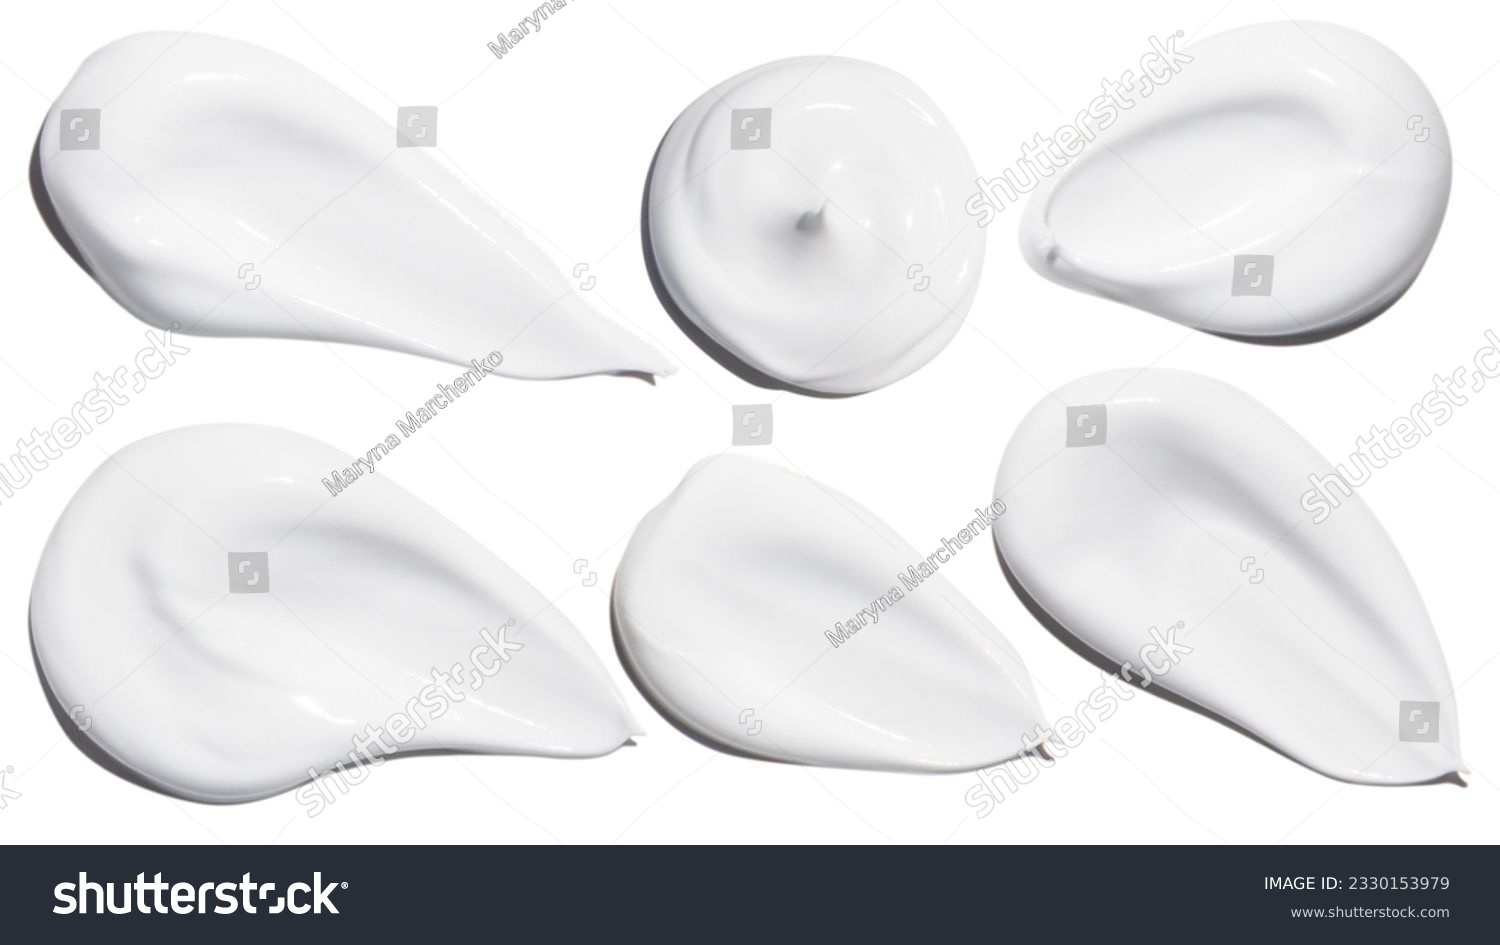 A set of smears of cosmetic cream on a white background #2330153979